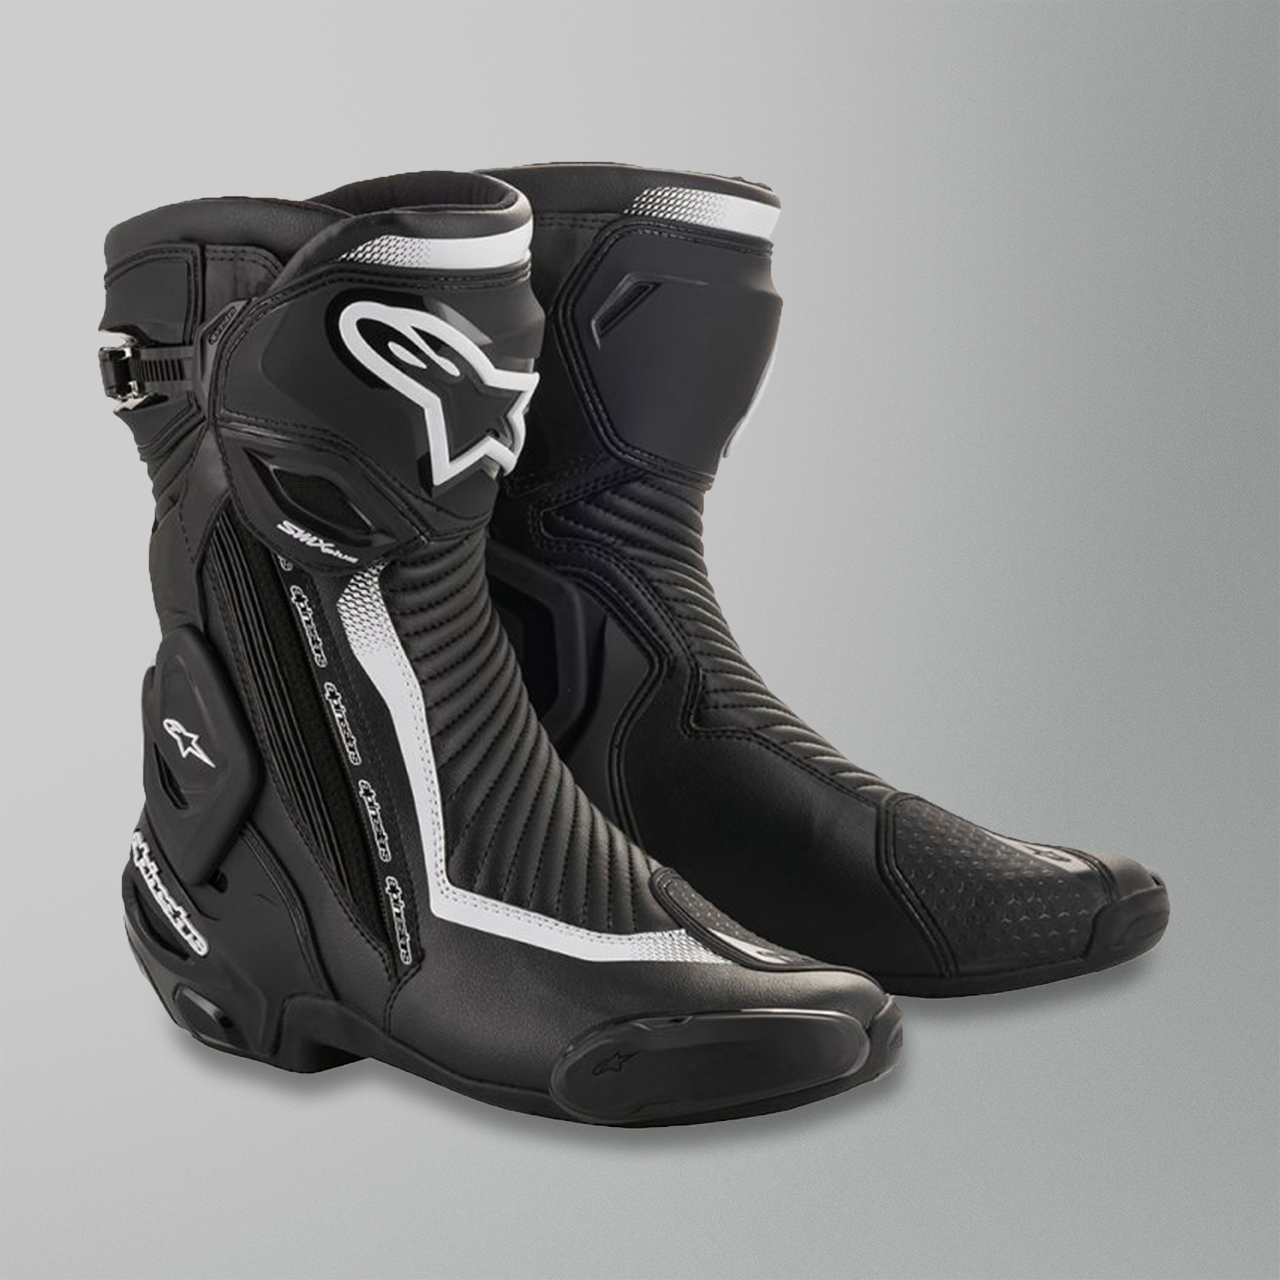 smx plus v2 boots